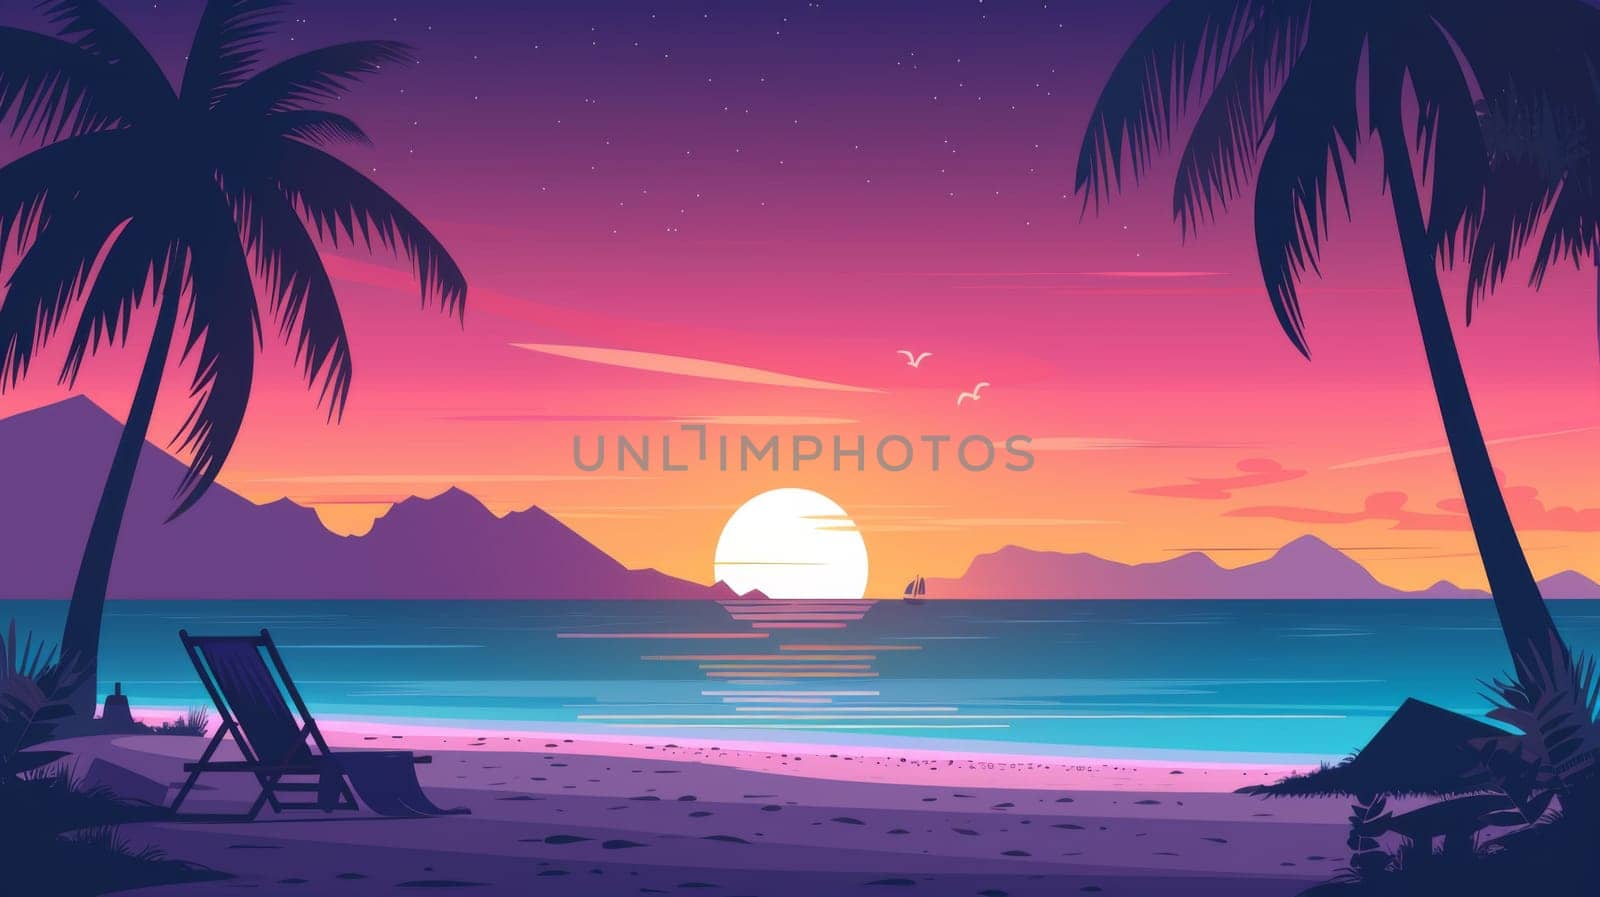 A beach scene with a chair and palm trees at sunset